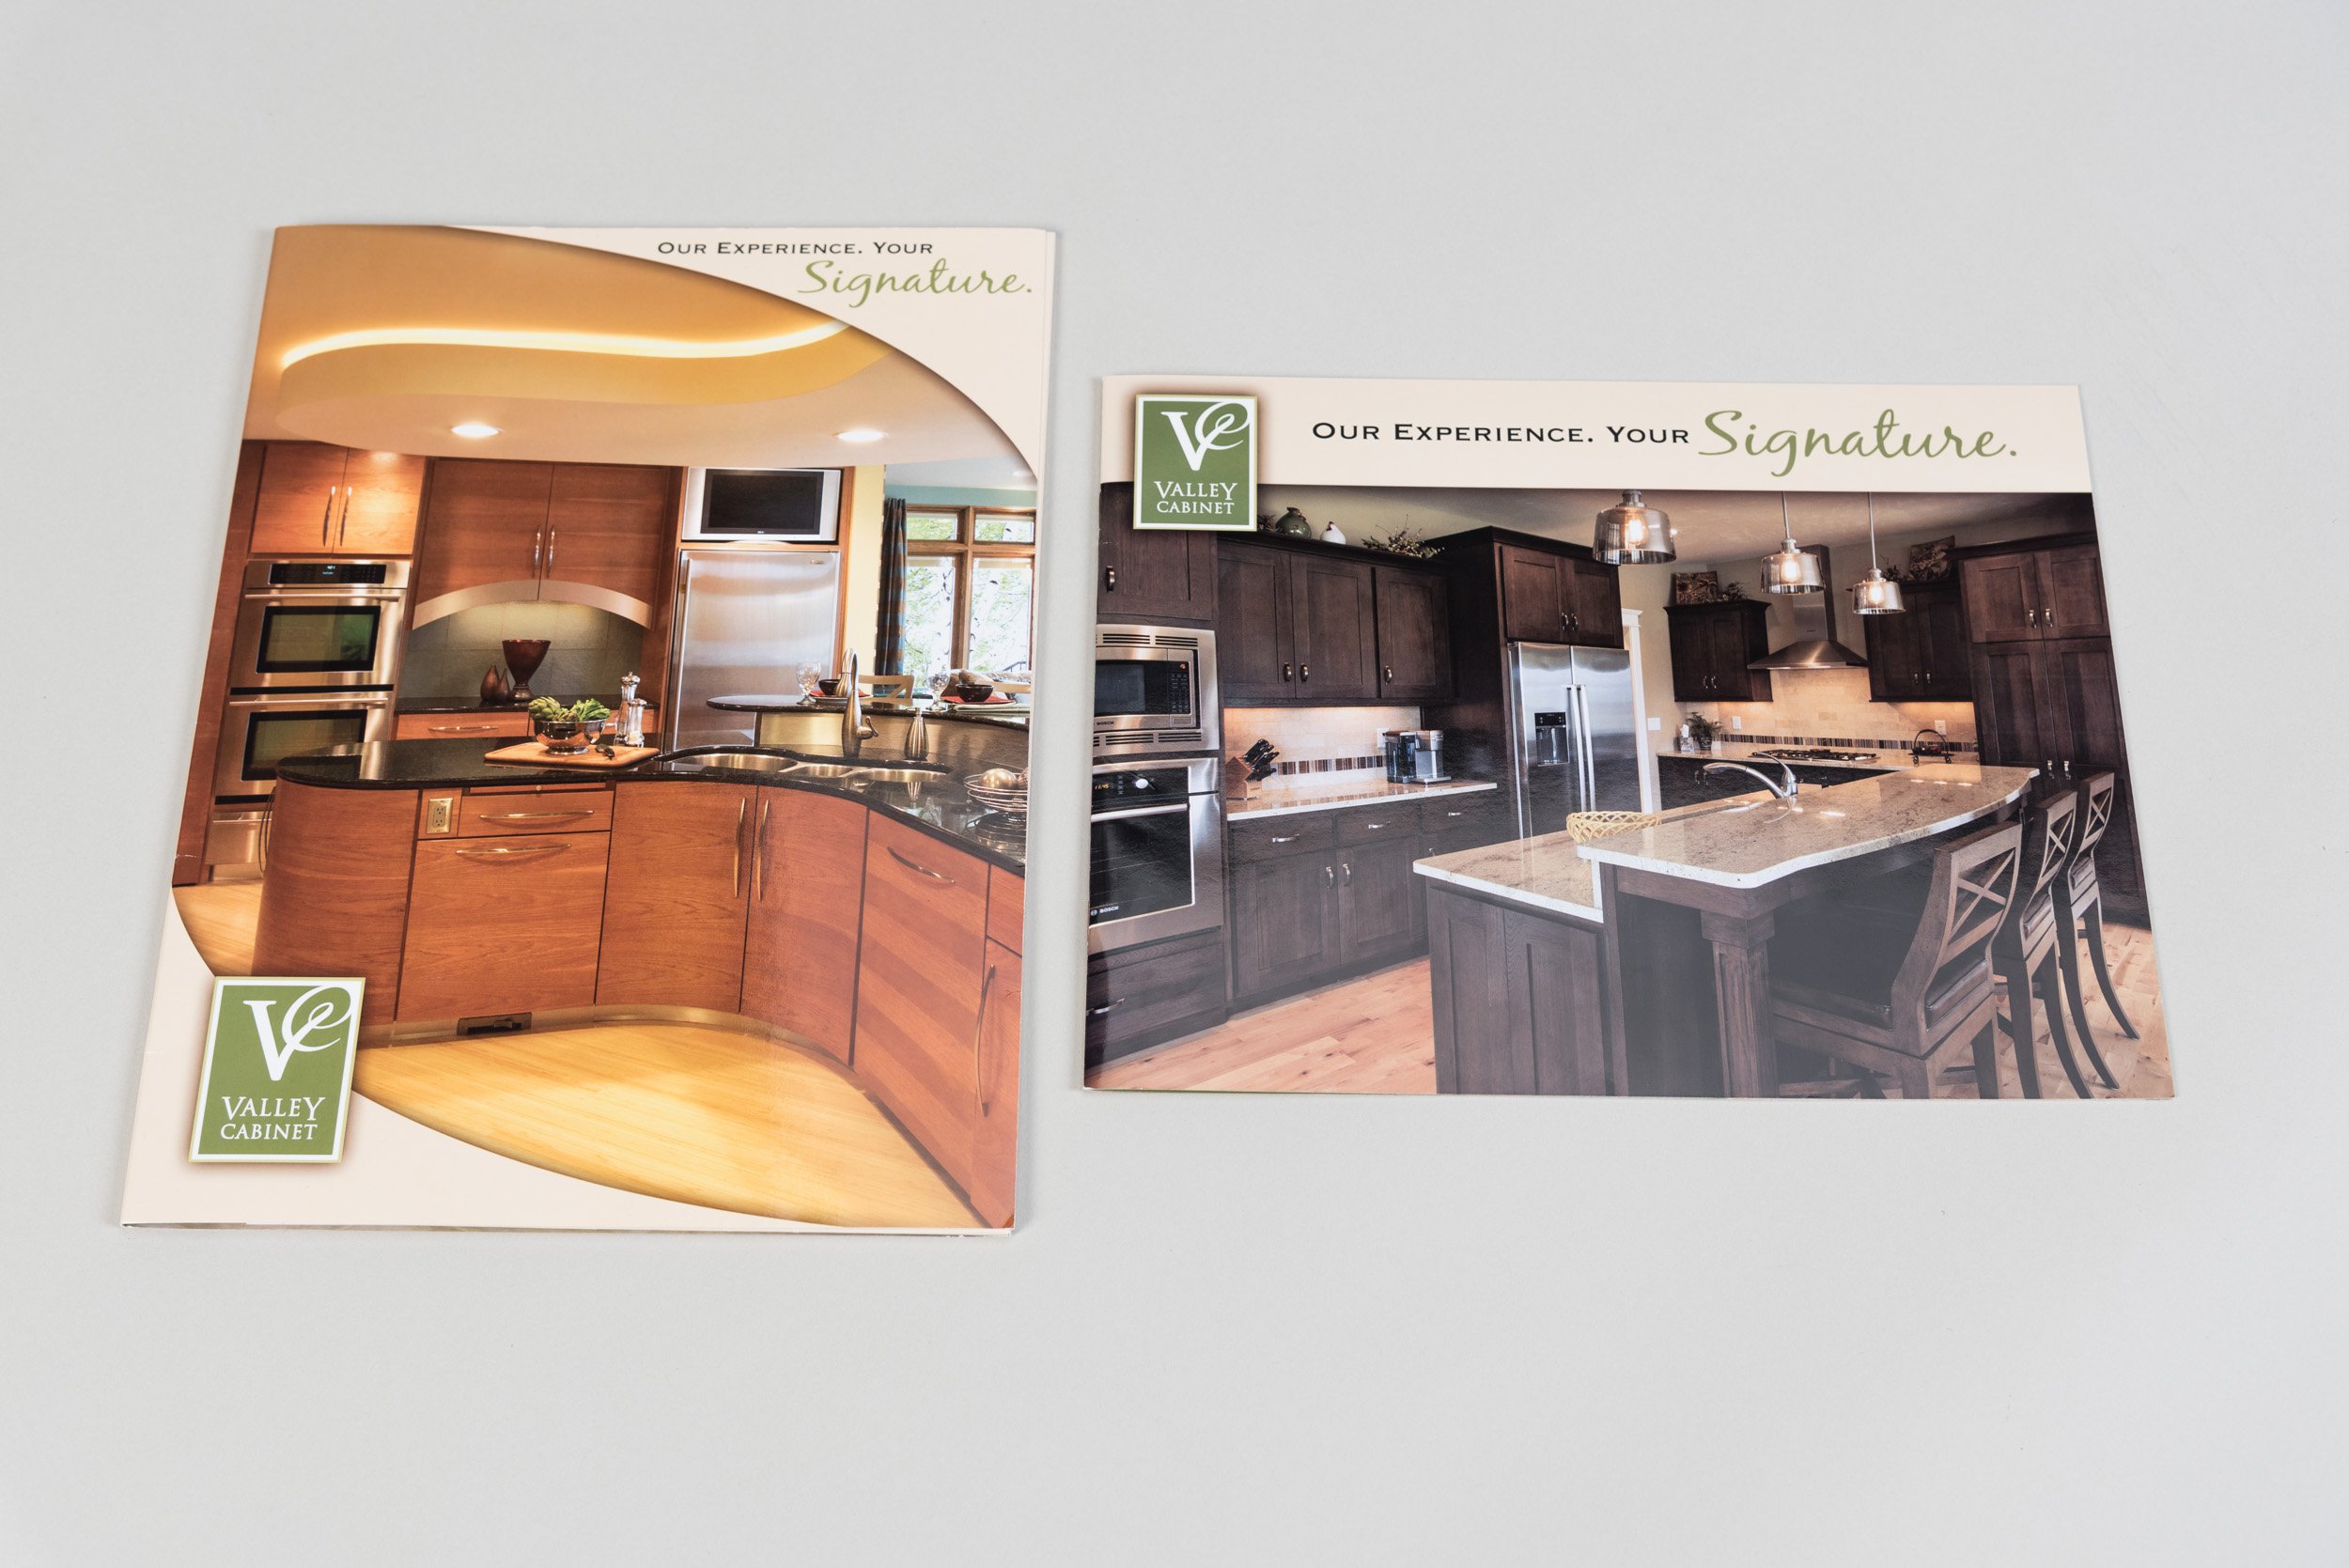 Valley Cabinet Brochure Side by Side